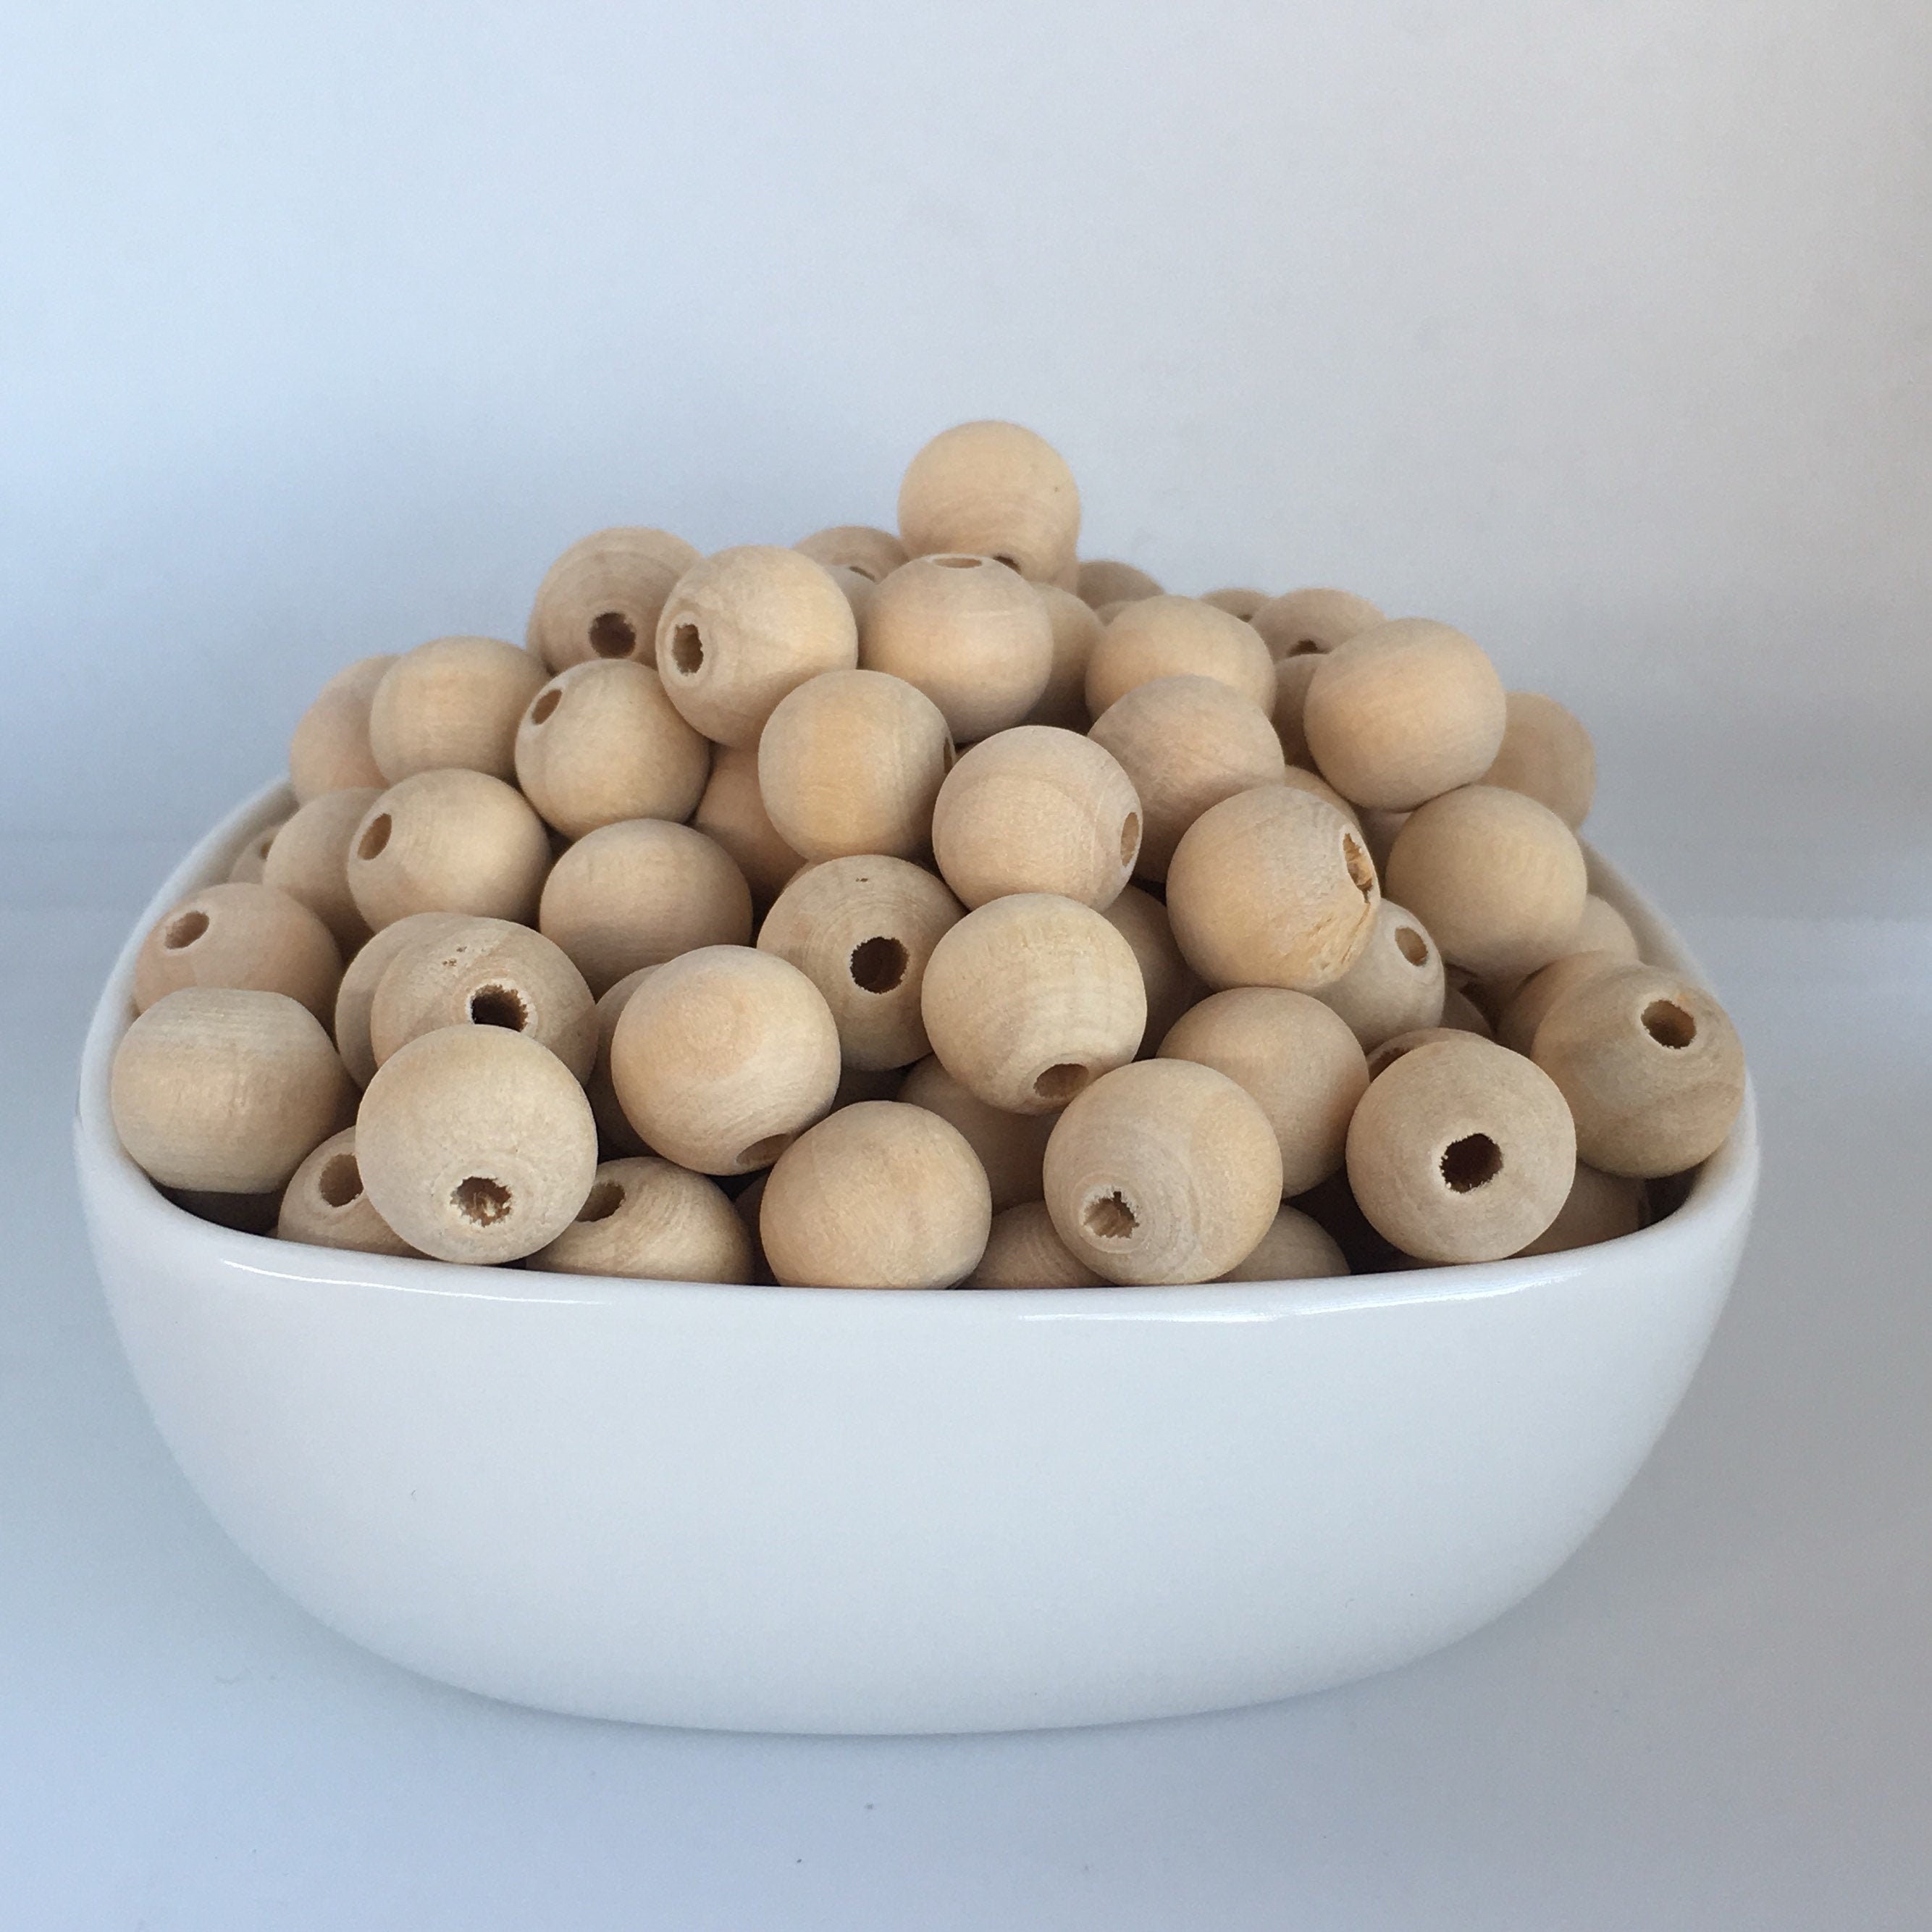 12x10mm Round Wooden Beads, Natural Unpainted Smooth Wood Bead, 50 Pieces  Beads 